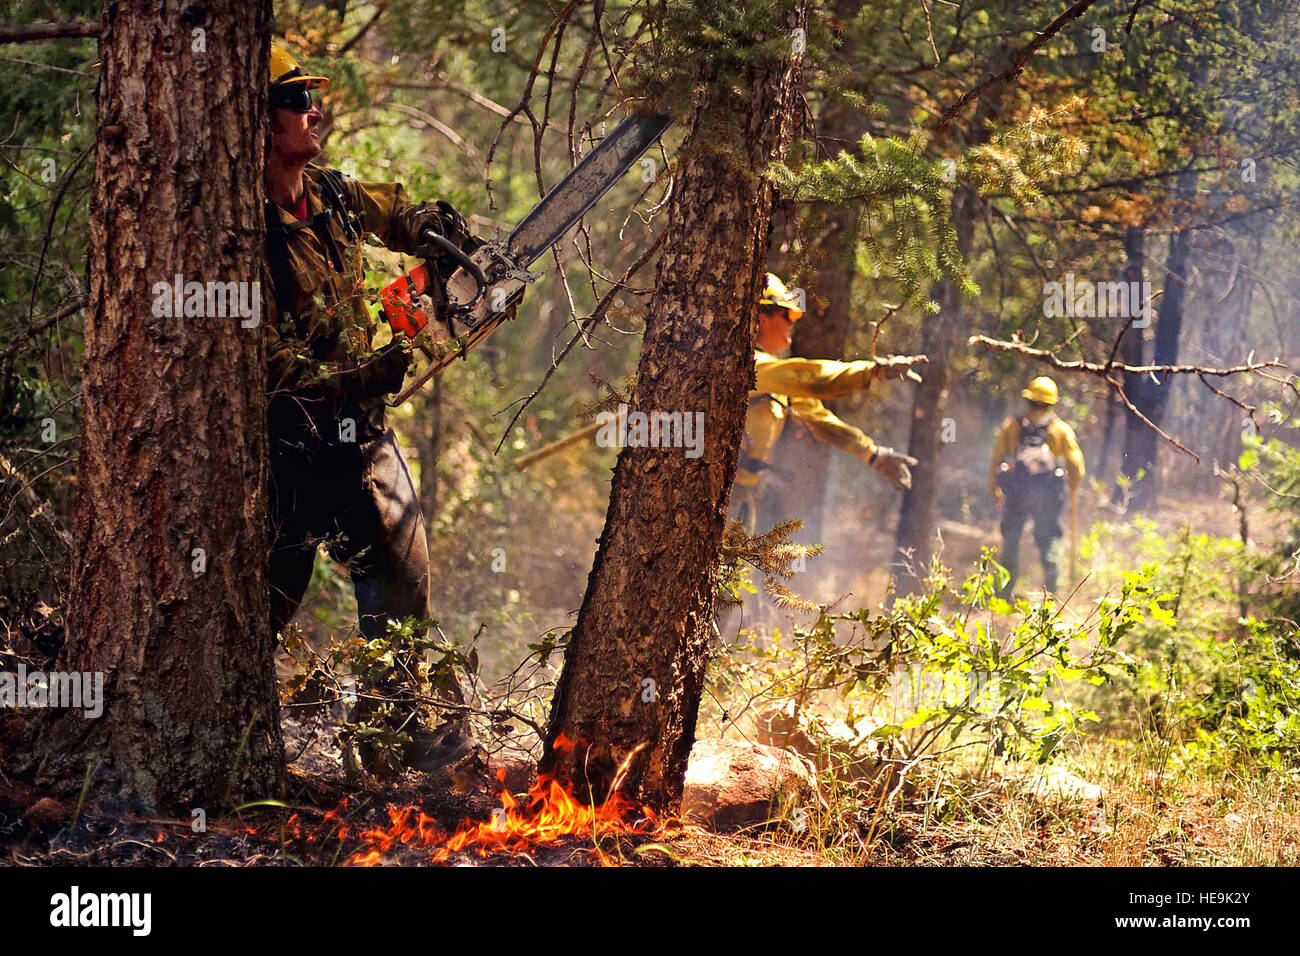 Vandenberg Air Force Base Hot Shot fire fighter Brad Mabery cuts a tree with his chainsaw while cutting and clearing a fire line on June 28, 2012 in the Mount Saint Francois area of Colorado Springs, Co. His team is helping to battle several fires in Waldo Canyon.  The Waldo Canyon fire has grown to 18,500 acres and burned over 300 homes. Currently, more than 90 firefighters from the Academy, along with assets from Air Force Space Command; F.E. Warren Air Force Base, Wyo.; Fort Carson, Colo.; and the local community continue to fight the Waldo Canyon fire.(: Master Sgt. Jeremy Lock) (Released) Stock Photo